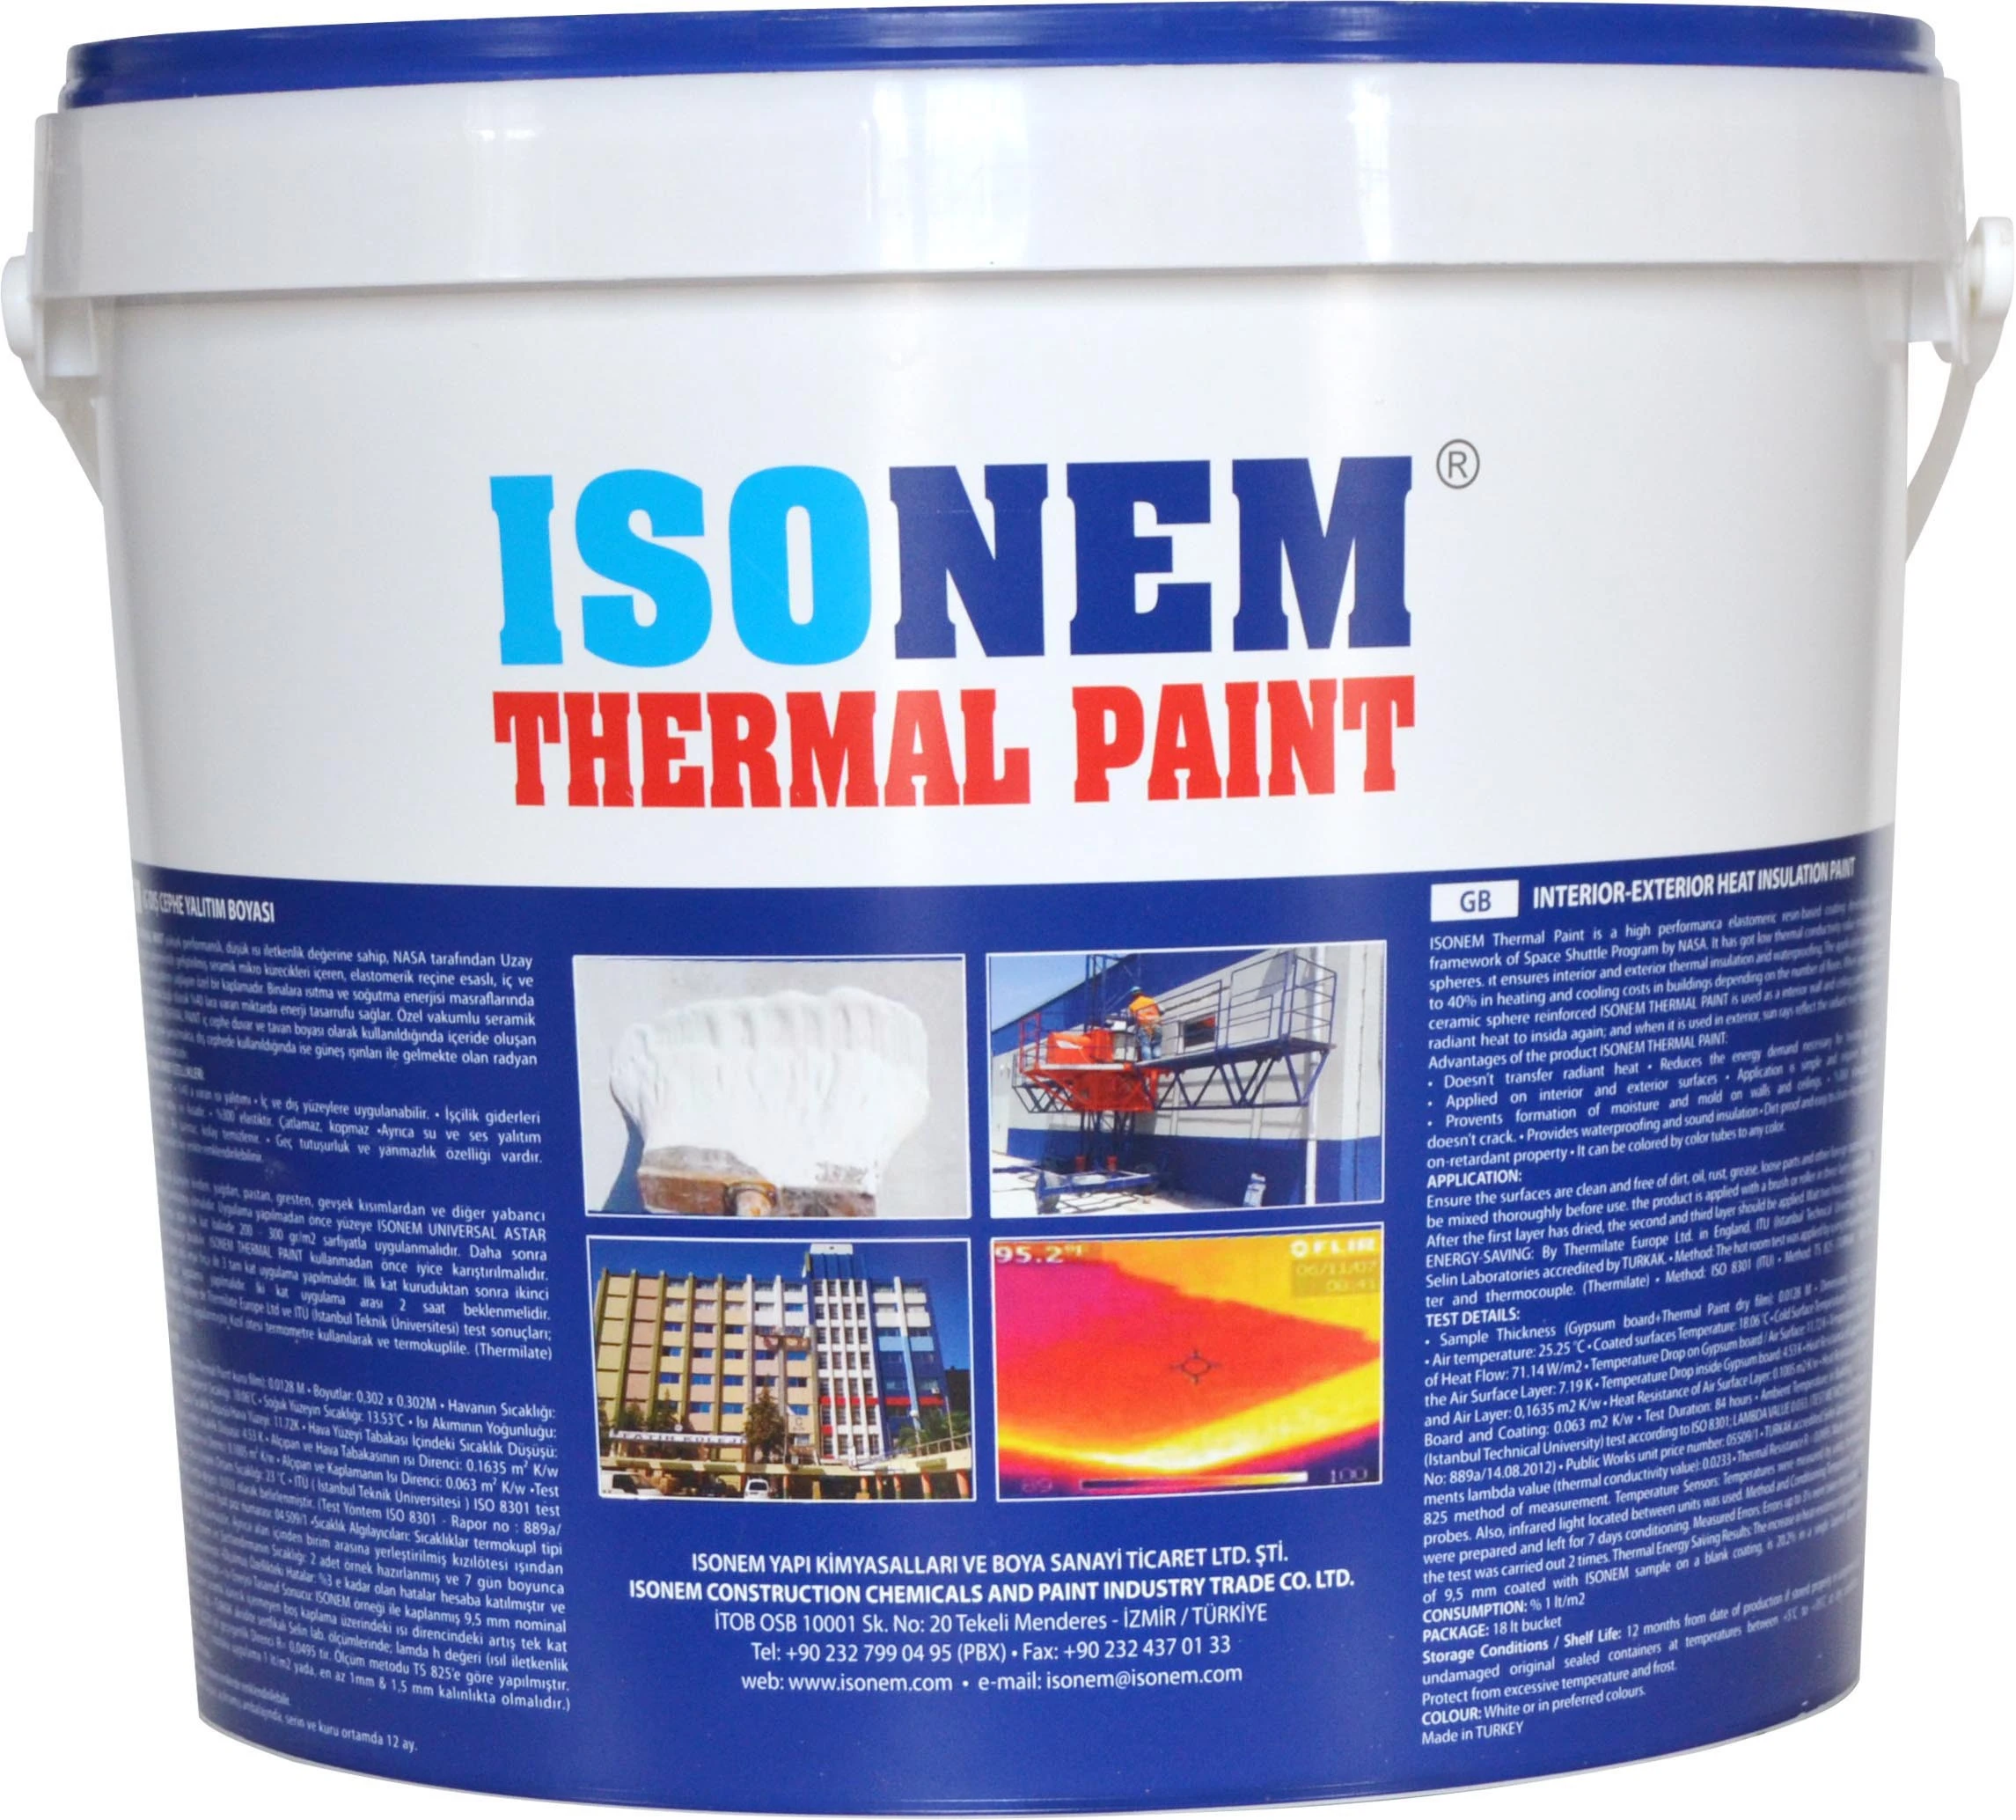 THERMAL PAINT - Exterior Interior Walls and Roofs Heat Insulation and Waterproofing Paint, Made in TURKEY